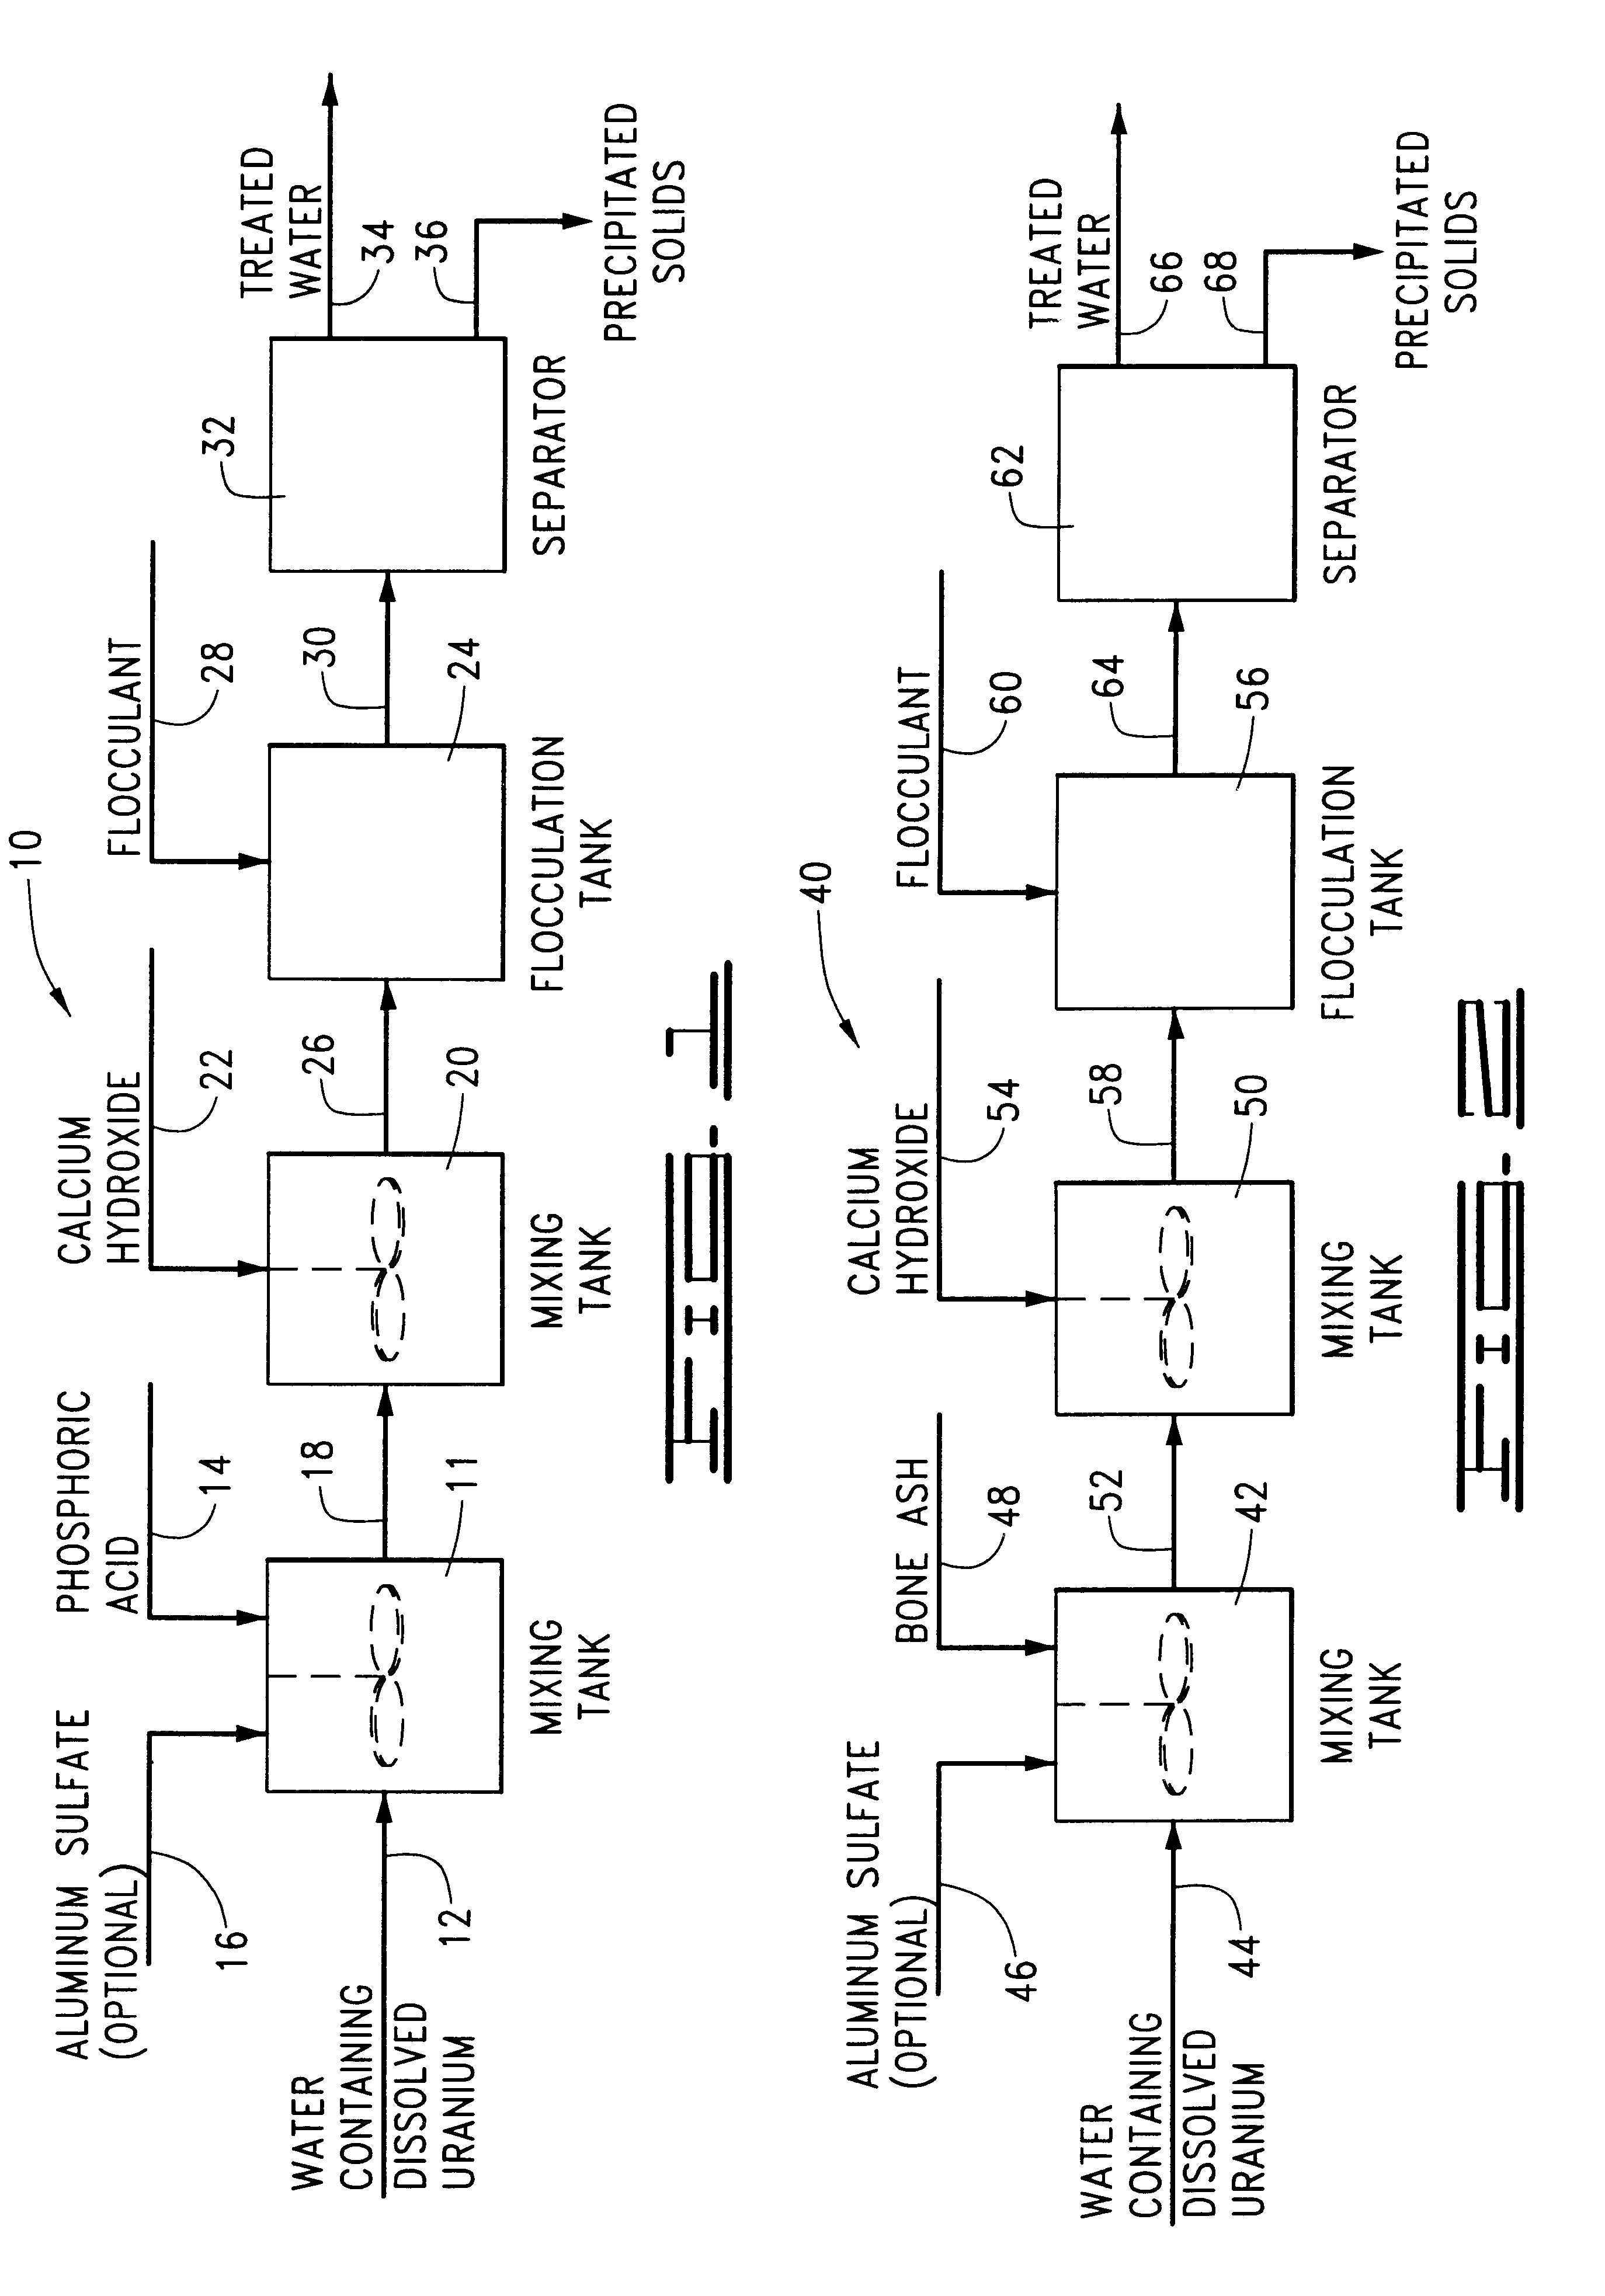 Process for removing dissolved uranium from water